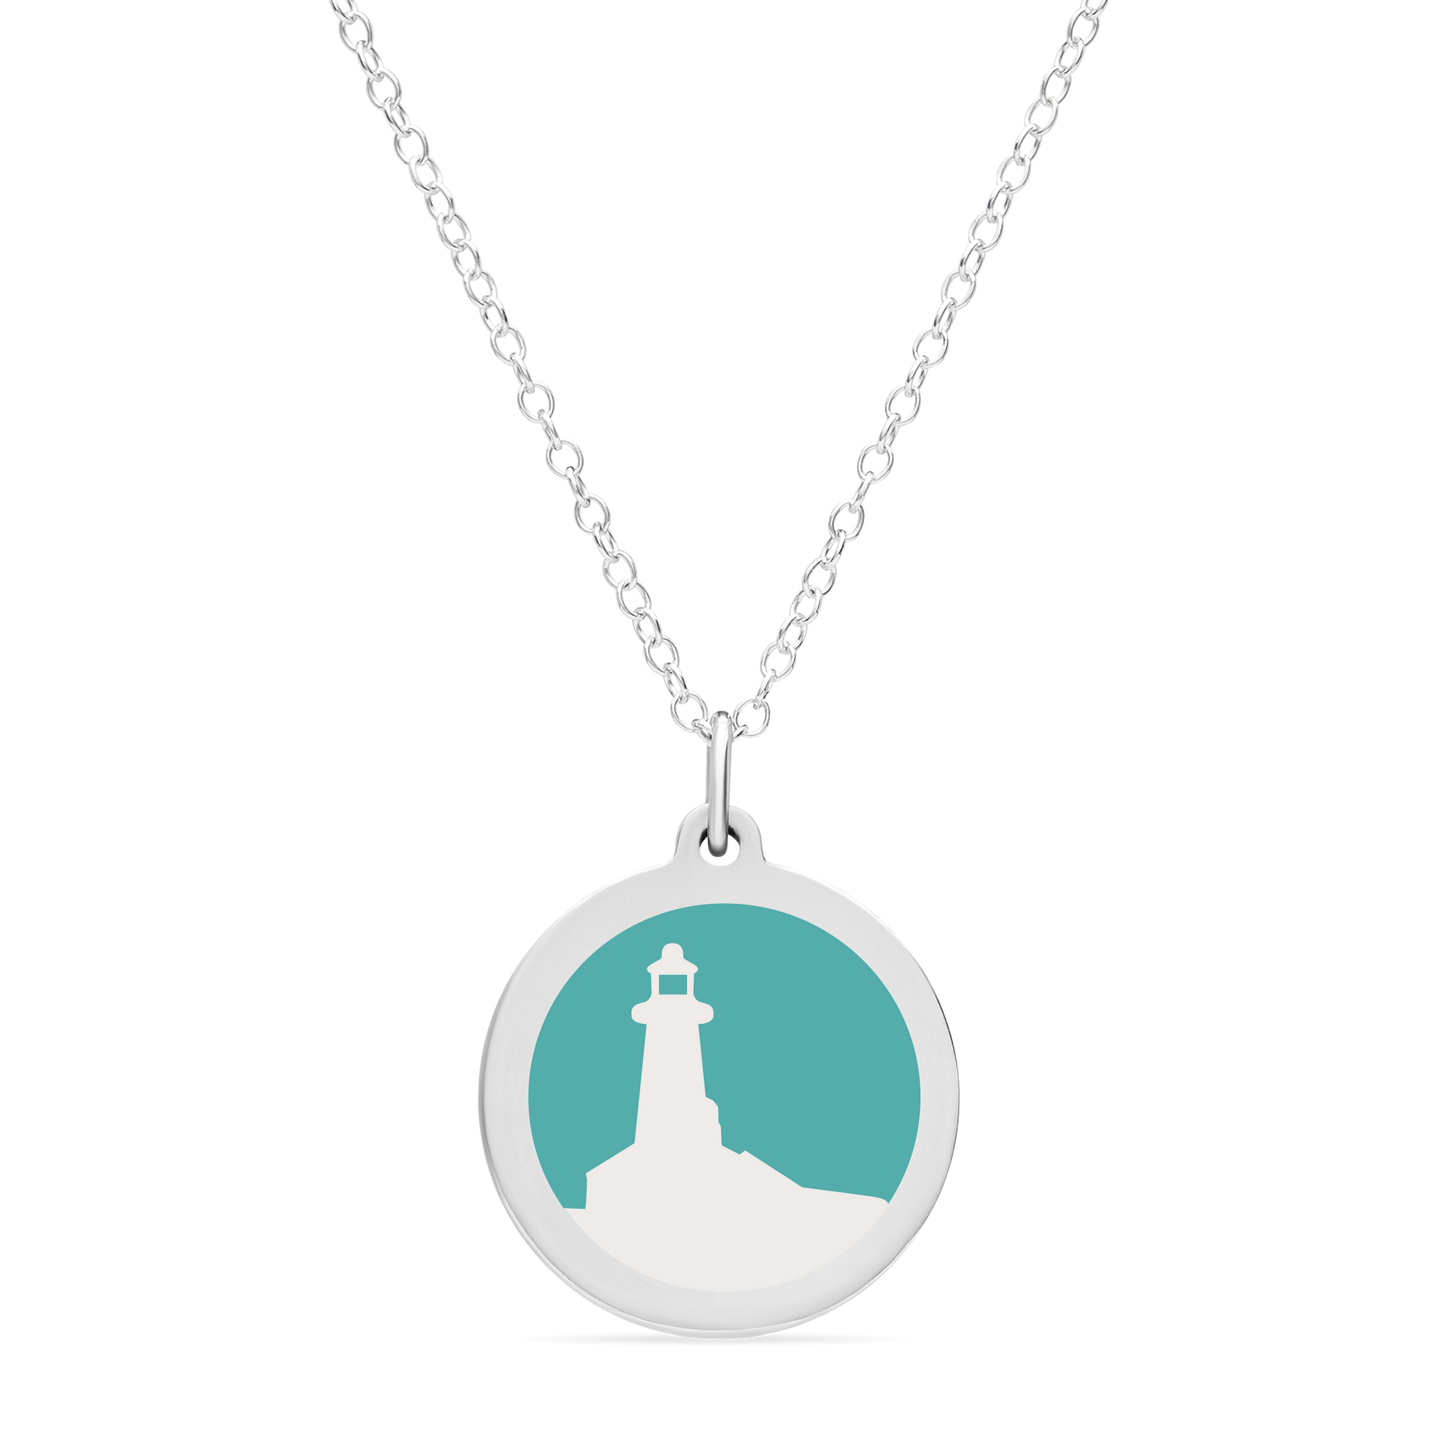 ORIGINAL LIGHTHOUSE CHARM in sterling silver with rhodium plate